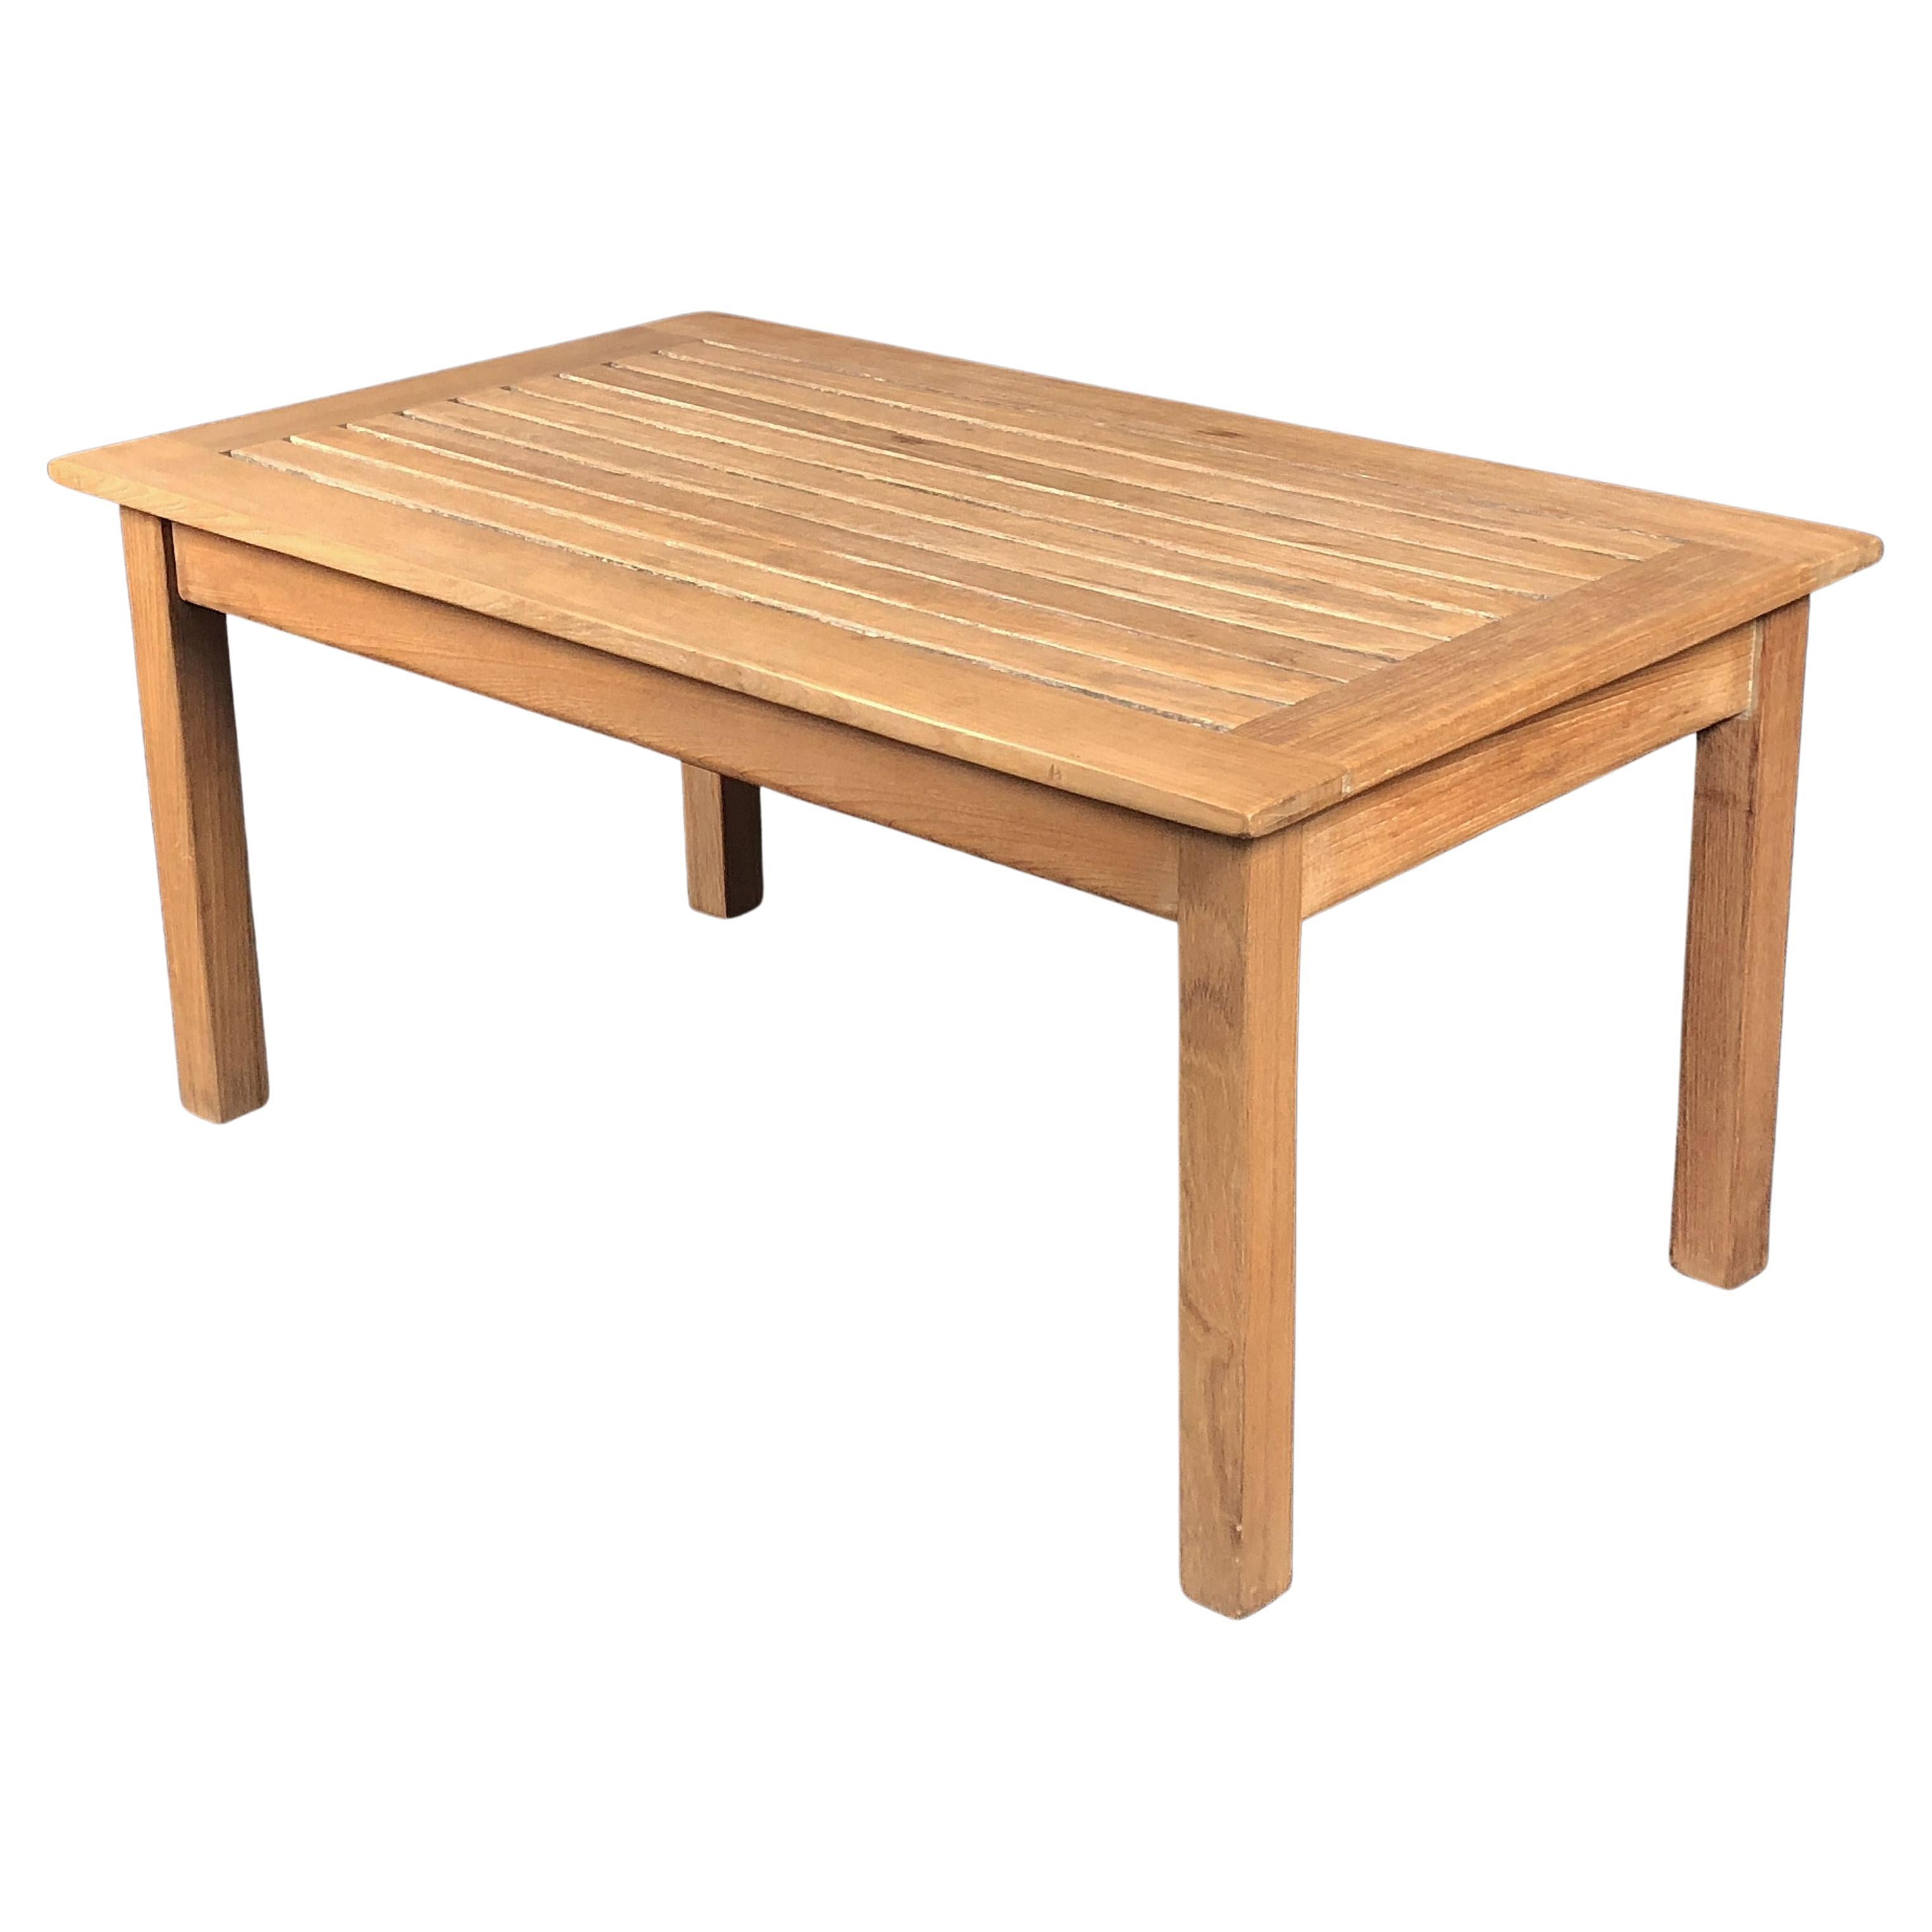 English Rectangular Low Table of Teak for the Garden or Patio For Sale